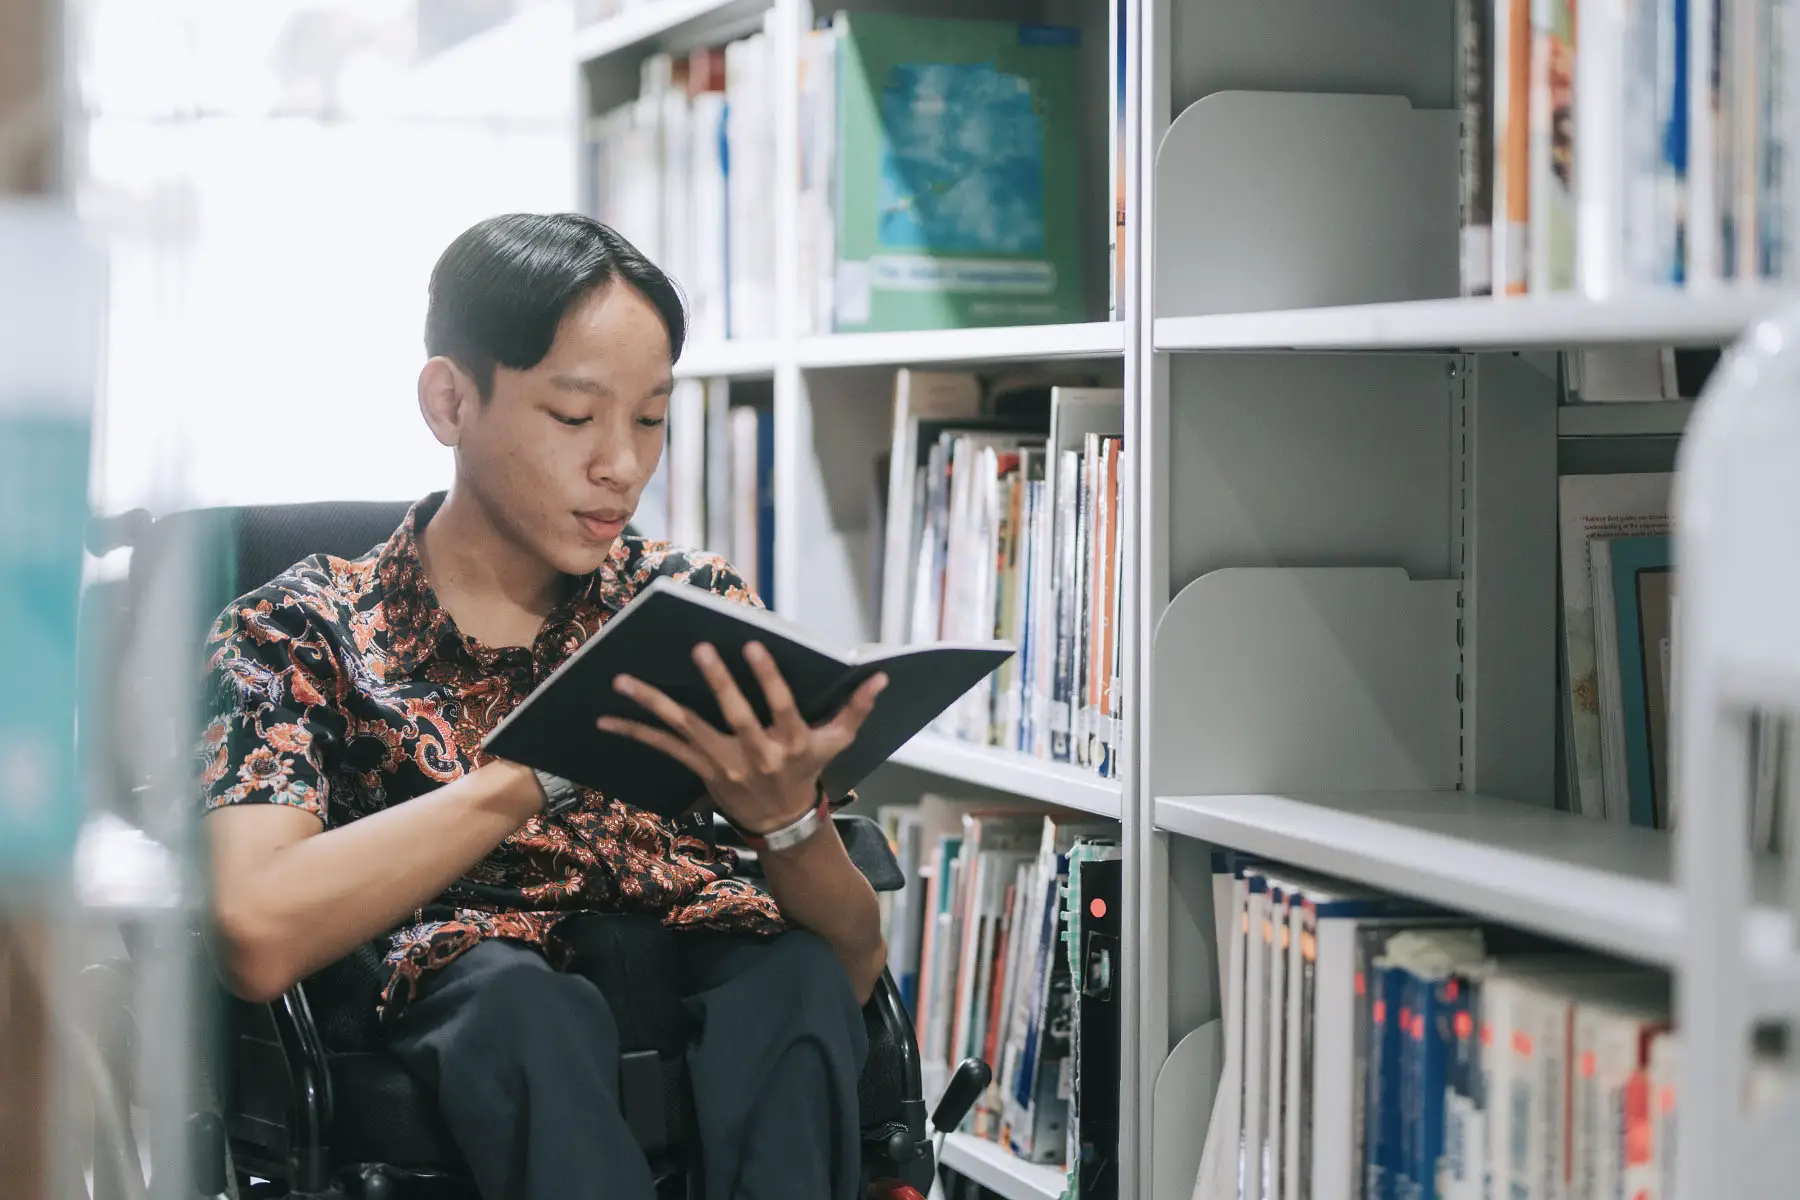 Student living with a disability in a wheelchair reading book in library.